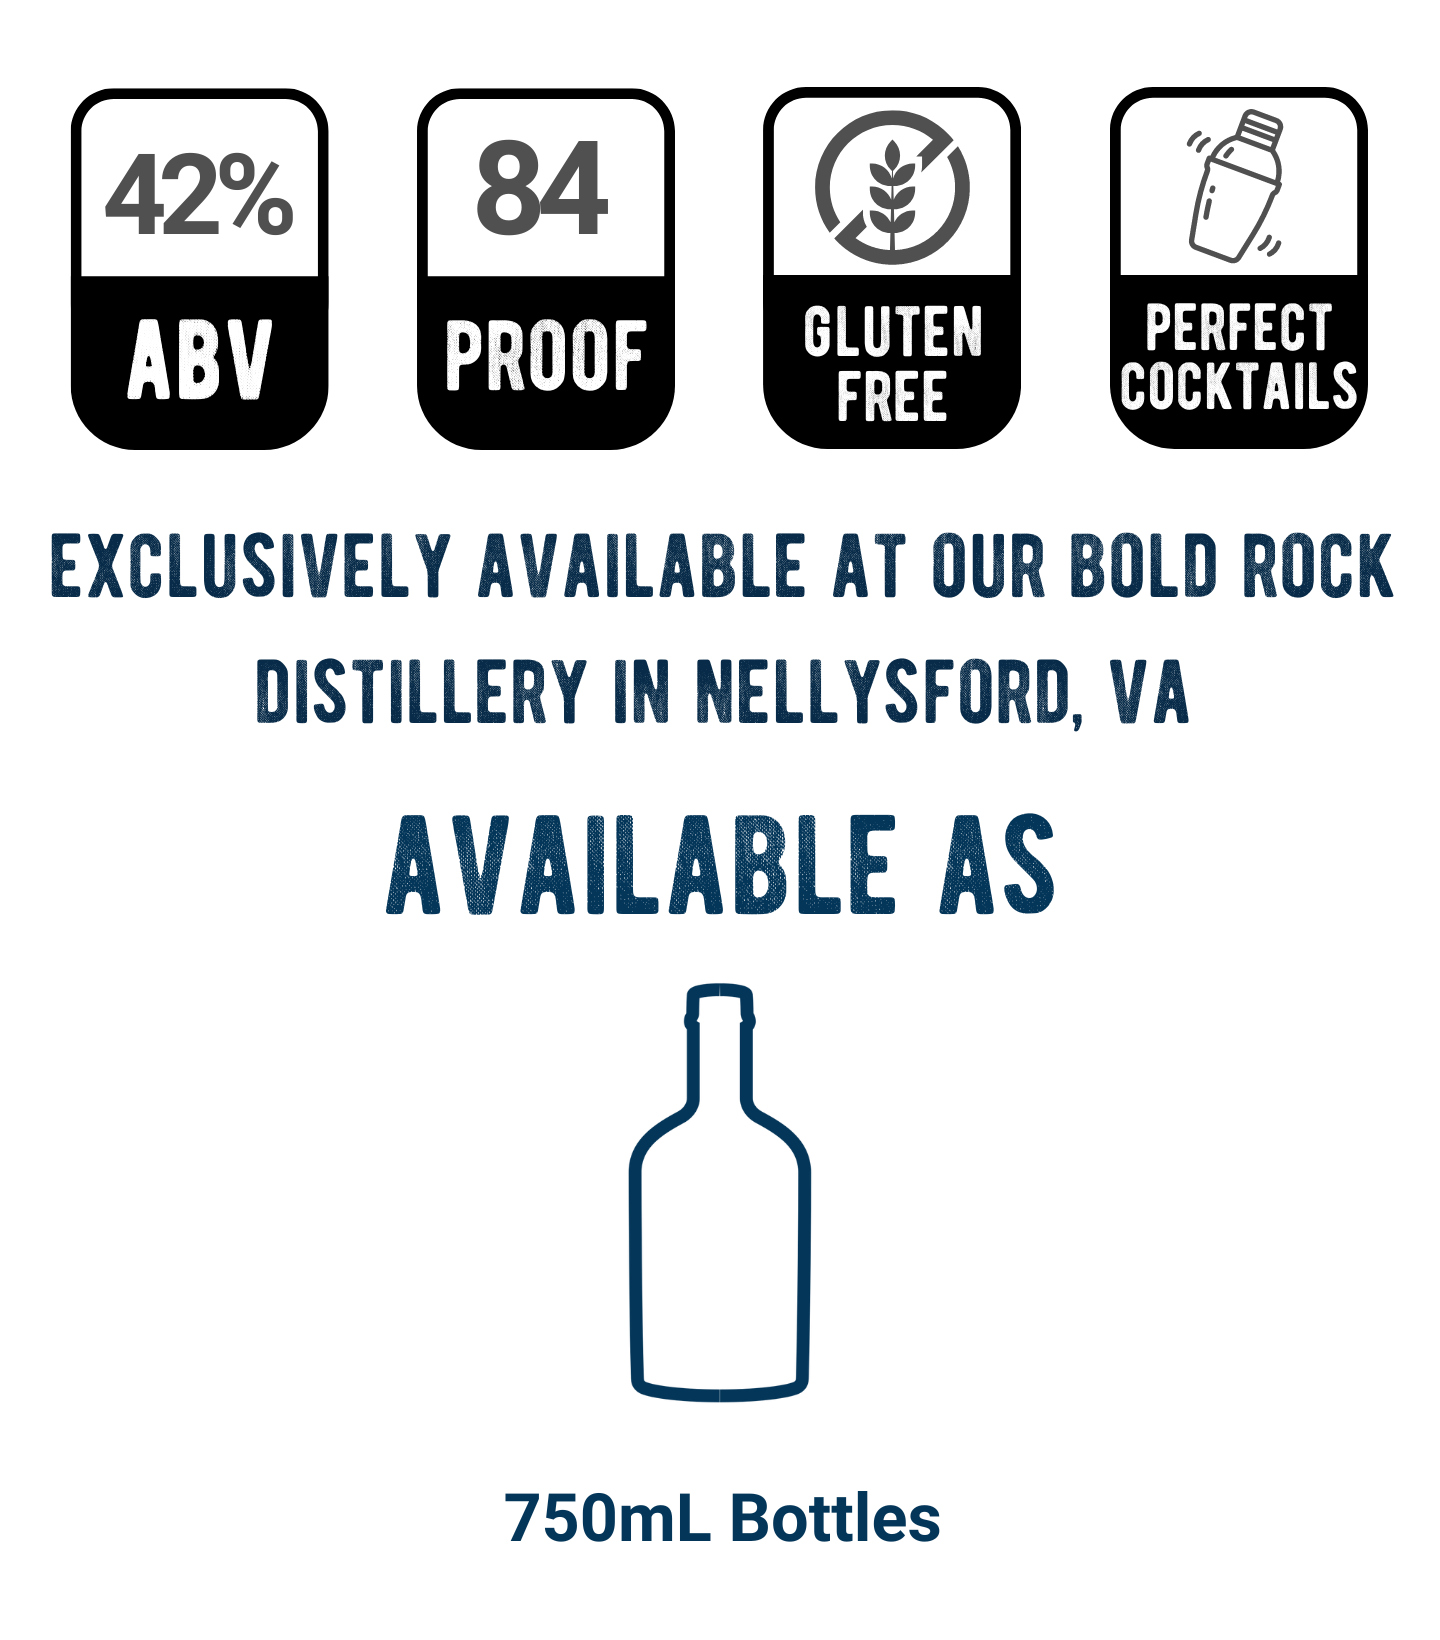 42% ABV, 84 proof, gluten free, perfect cocktails